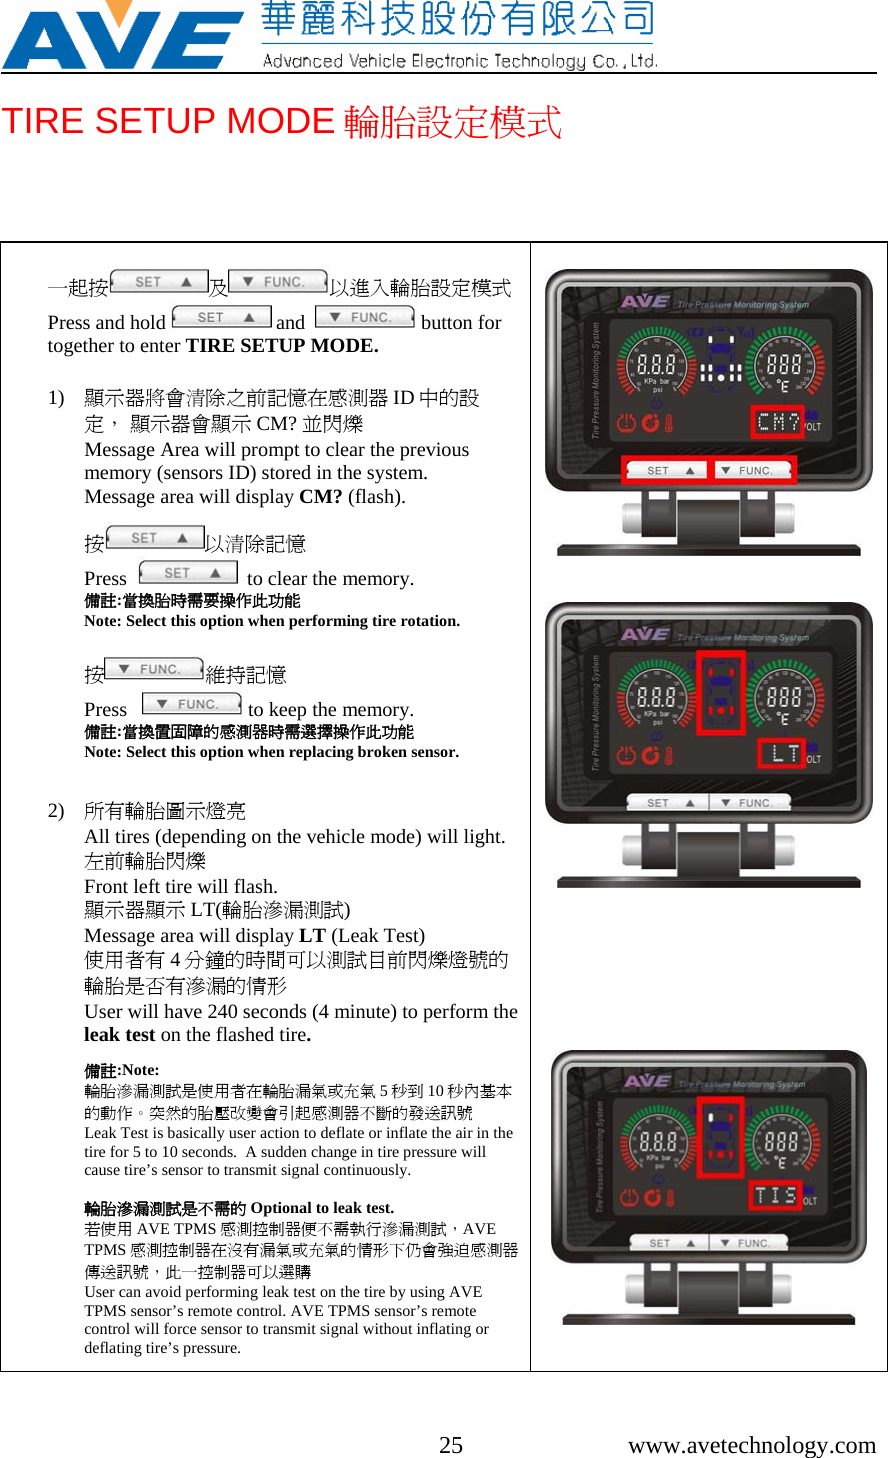     25 www.avetechnology.com TIRE SETUP MODE 輪胎設定模式  一起按 及以進入輪胎設定模式Press and hold   and    button for together to enter TIRE SETUP MODE.   1) 顯示器將會清除之前記憶在感測器 ID 中的設定， 顯示器會顯示 CM? 並閃爍                              Message Area will prompt to clear the previous memory (sensors ID) stored in the system. Message area will display CM? (flash).                          按以清除記憶                                  Press     to clear the memory. 備註:當換胎時需要操作此功能 Note: Select this option when performing tire rotation.  按維持記憶                                      Press     to keep the memory. 備註:當換置固障的感測器時需選擇操作此功能                             Note: Select this option when replacing broken sensor.   2) 所有輪胎圖示燈亮                   All tires (depending on the vehicle mode) will light. 左前輪胎閃爍                                                      Front left tire will flash.  顯示器顯示 LT(輪胎滲漏測試)                                Message area will display LT (Leak Test)   使用者有 4分鐘的時間可以測試目前閃爍燈號的輪胎是否有滲漏的情形 User will have 240 seconds (4 minute) to perform the leak test on the flashed tire.  備註:Note:  輪胎滲漏測試是使用者在輪胎漏氣或充氣 5秒到 10 秒內基本的動作。突然的胎壓改變會引起感測器不斷的發送訊號             Leak Test is basically user action to deflate or inflate the air in the tire for 5 to 10 seconds.  A sudden change in tire pressure will cause tire’s sensor to transmit signal continuously.   輪胎滲漏測試是不需的 Optional to leak test.  若使用 AVE TPMS 感測控制器便不需執行滲漏測試，AVE TPMS 感測控制器在沒有漏氣或充氣的情形下仍會強迫感測器傳送訊號，此一控制器可以選購 User can avoid performing leak test on the tire by using AVE TPMS sensor’s remote control. AVE TPMS sensor’s remote control will force sensor to transmit signal without inflating or deflating tire’s pressure.               